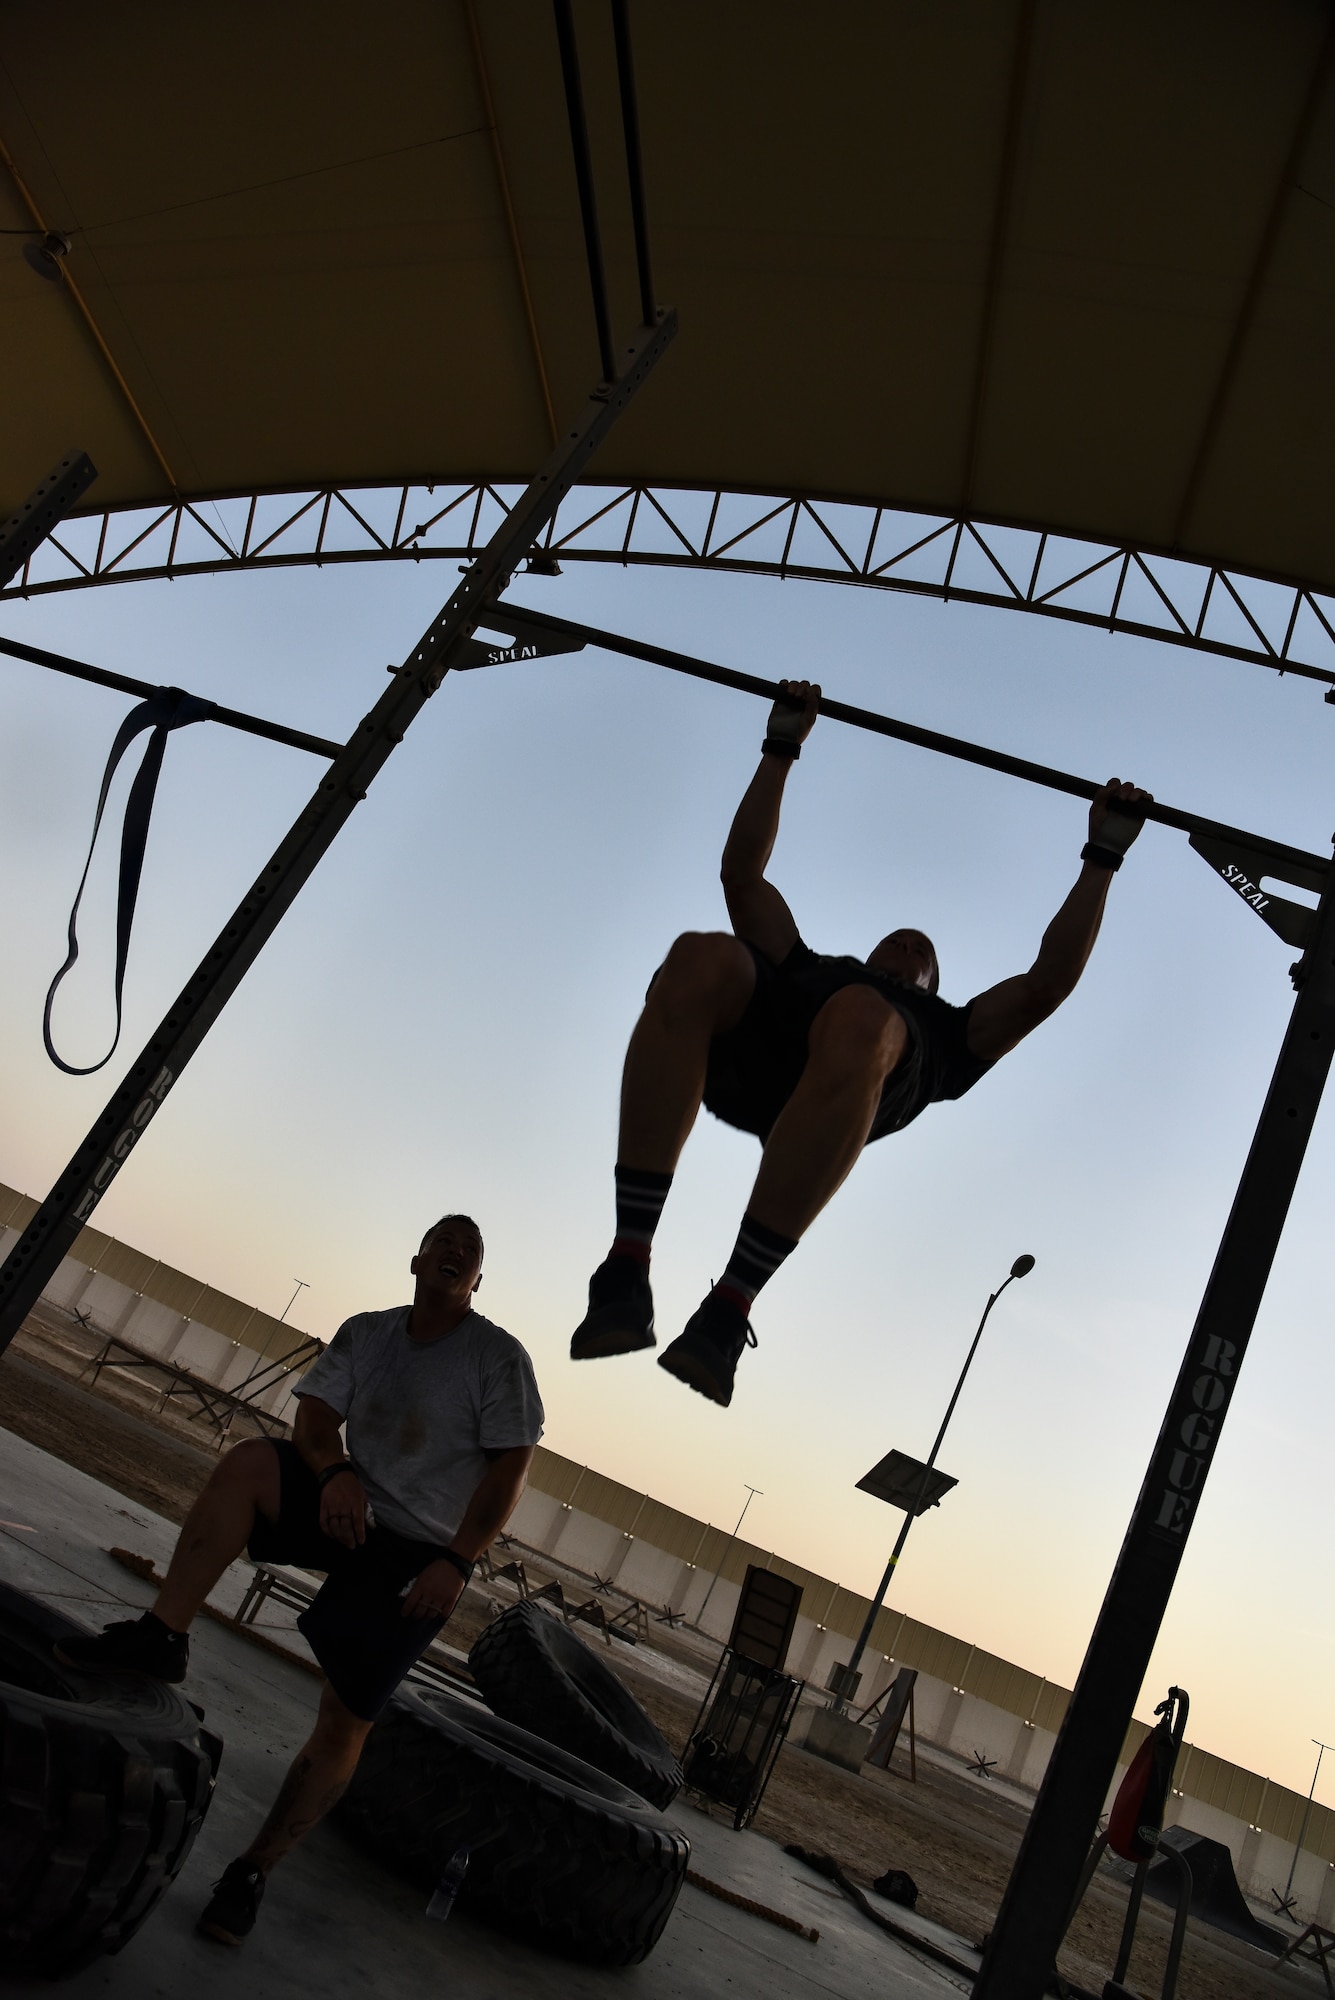 A U.S. Air Force Airman executes chest-to-bar pull-ups during the EOD 134 Memorial Workout at Al Dhafra Air Base, United Arab Emirates, Nov. 30, 2018. 380th Air Expeditionary Wing Airmen, along with coalition partners, participated in the workout to honor the 134 EOD technicians from the U.S. Air Force, Army, Navy and Marine Corps that have been killed since Sept. 11, 2001. (U.S. Air Force photo by Senior Airman Mya M. Crosby)